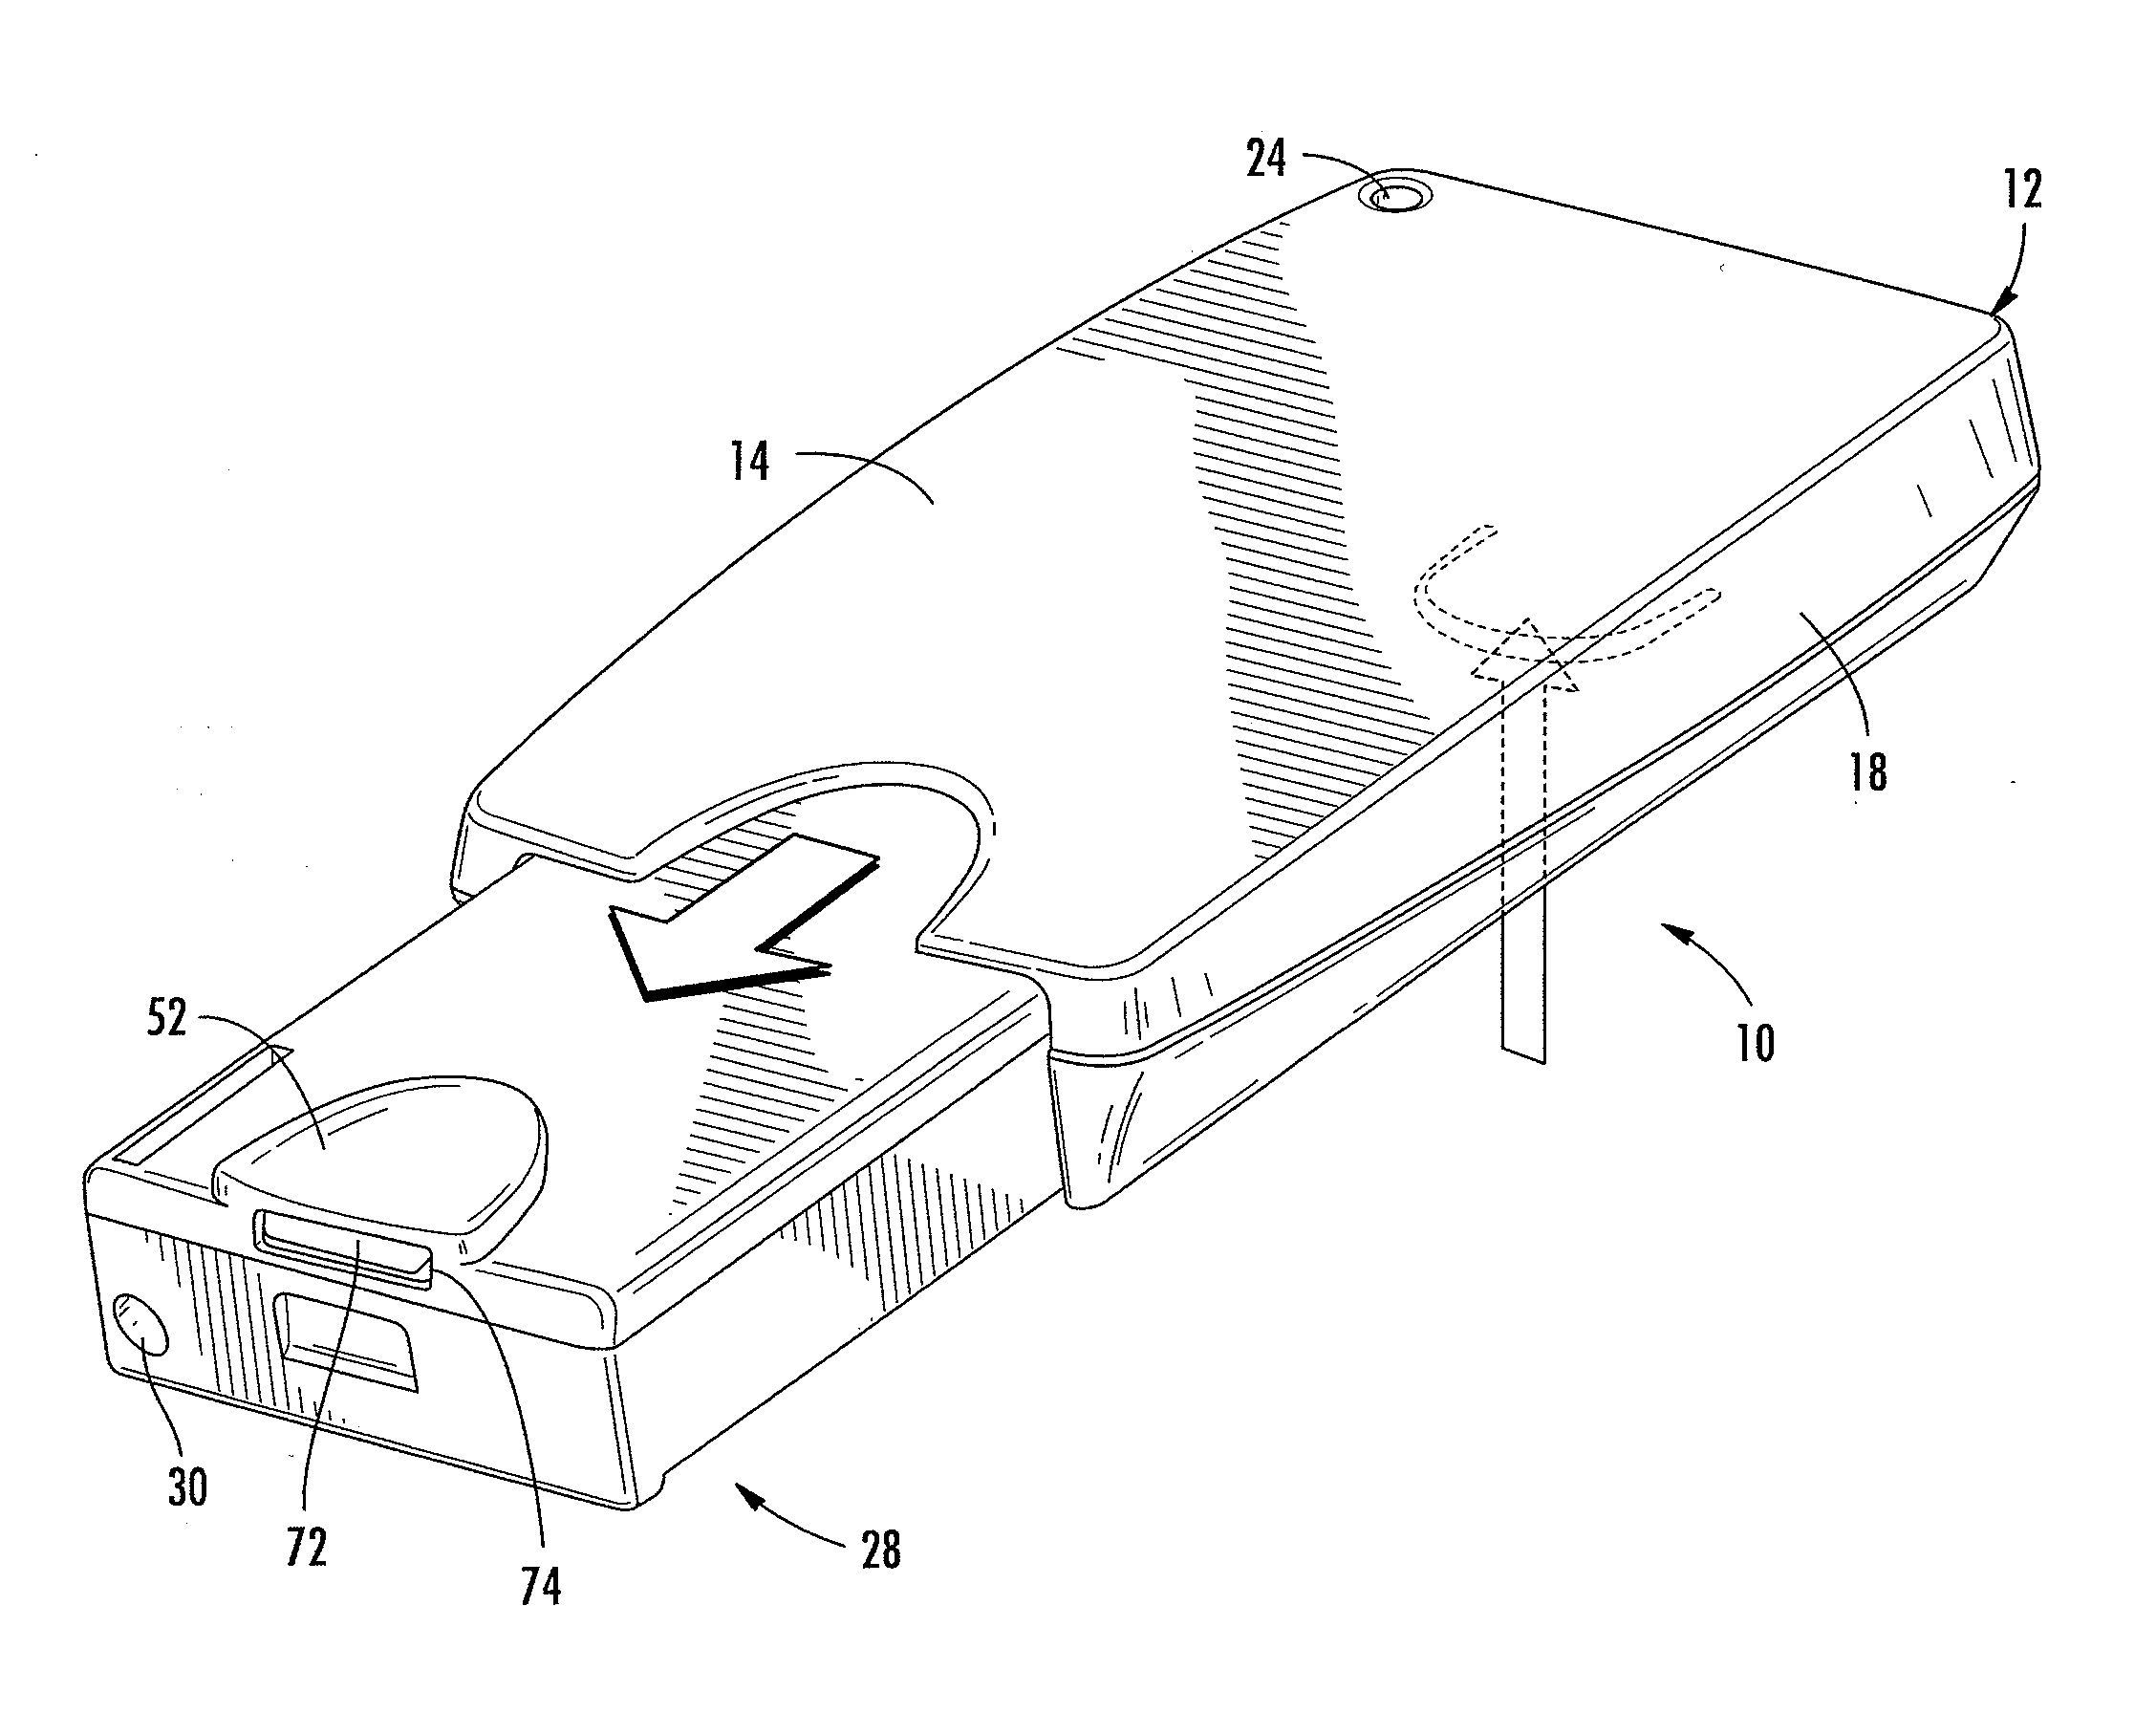 Dispensing container for metered dispensing of product